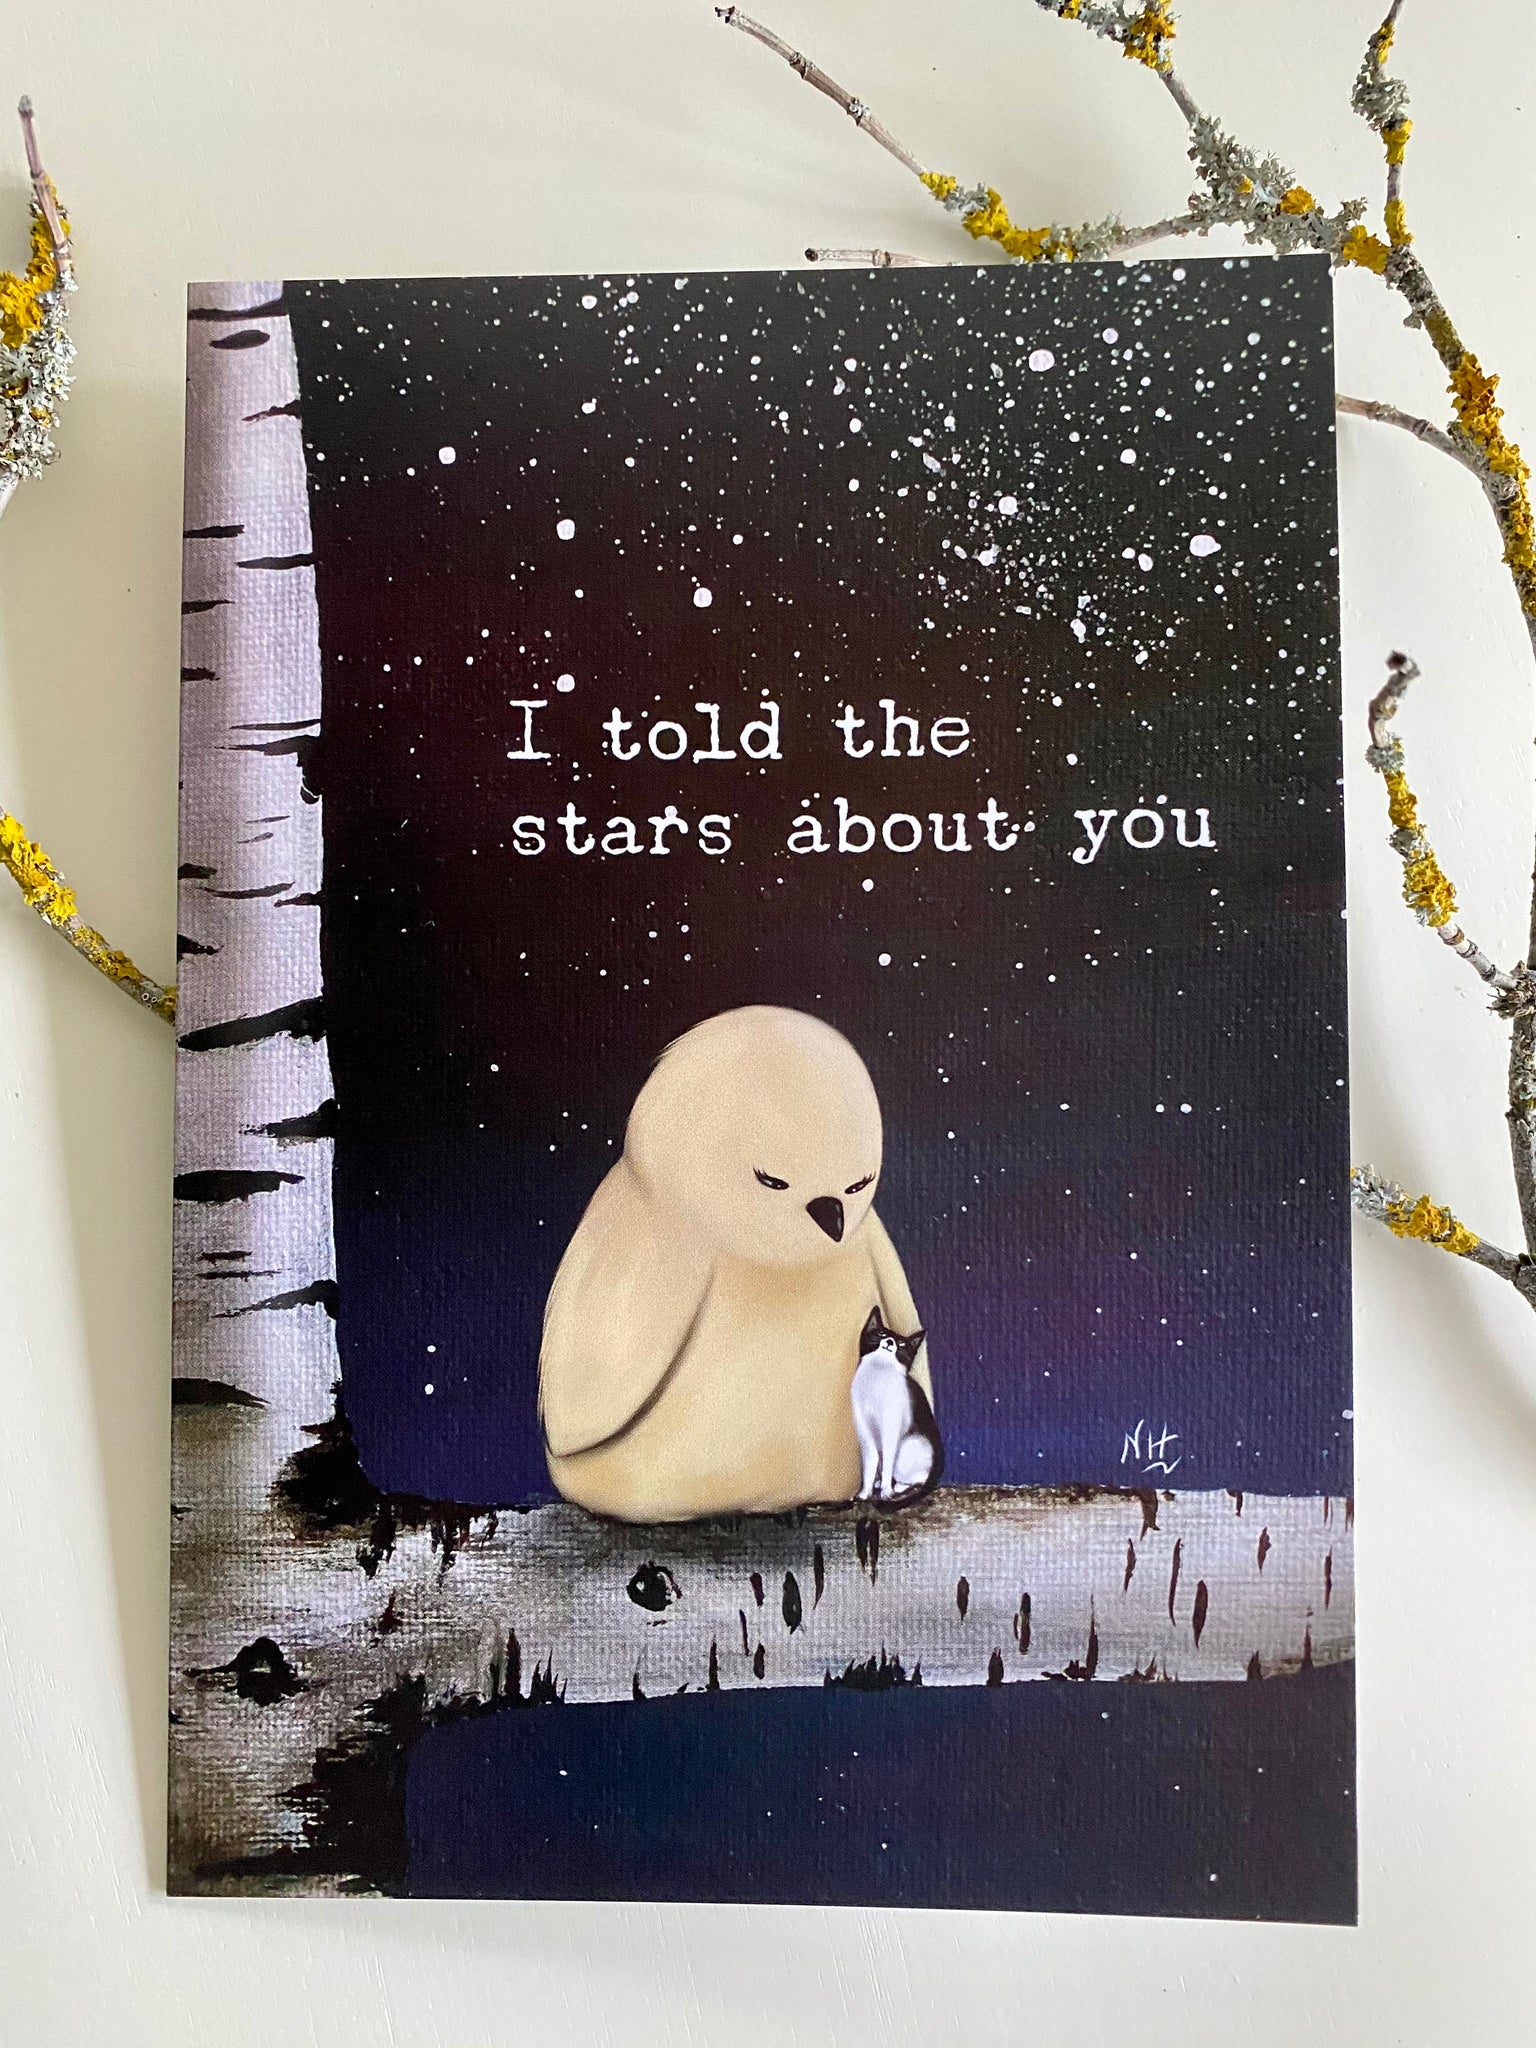 I Told The Stars About You: Greeting Card